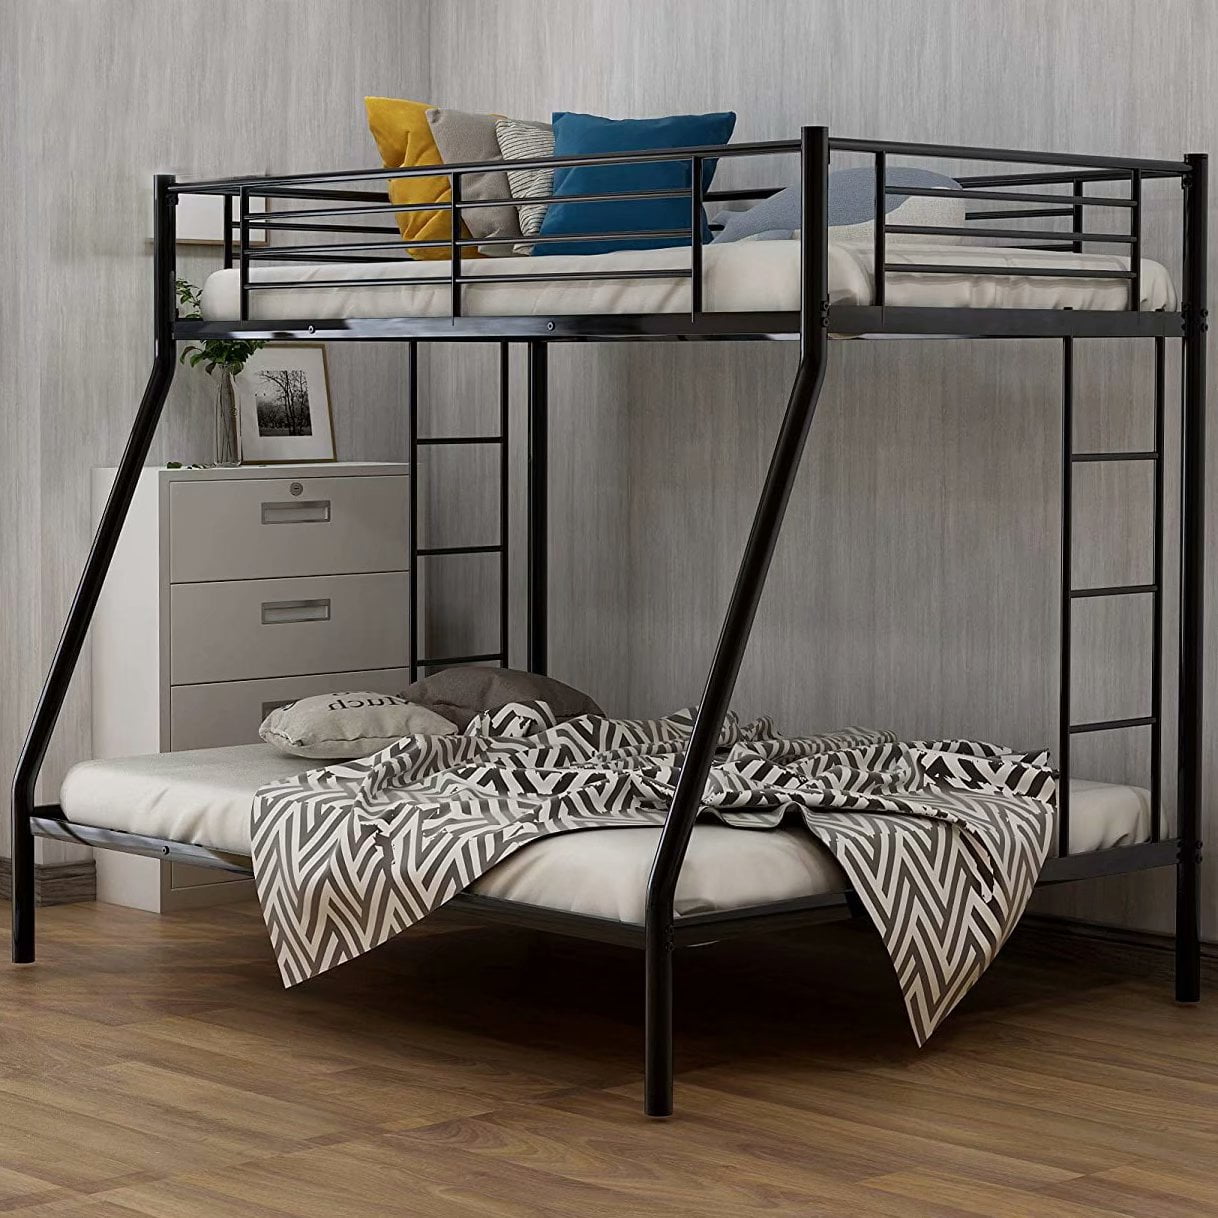 Depus Twin Over Full Bunk Beds For Kids, Metal Bunk Bed Decorating Ideas